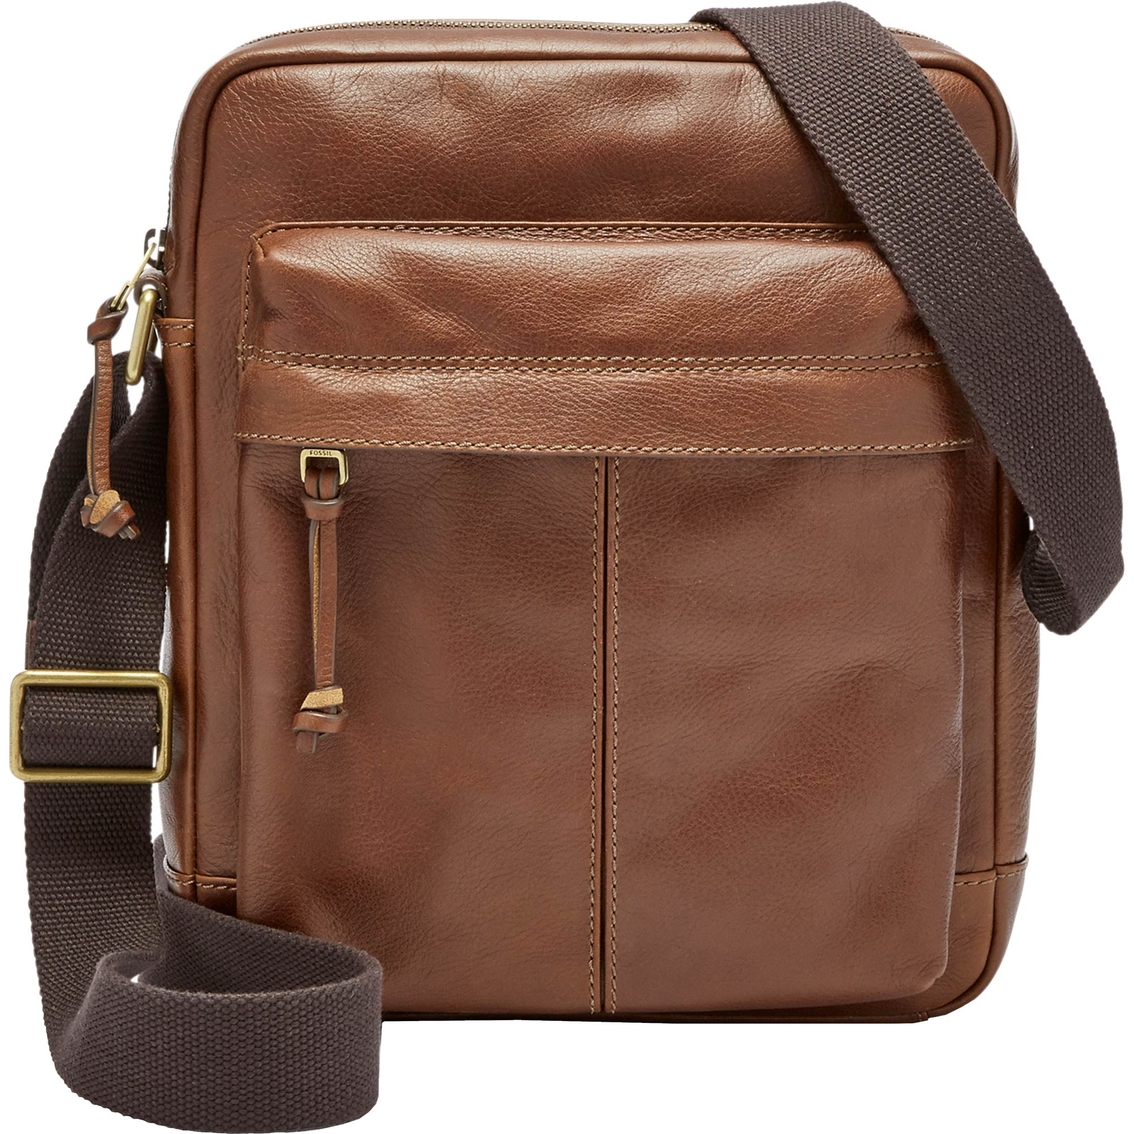 Fossil Defender North South City Bag | Travel Accessories | Clothing ...